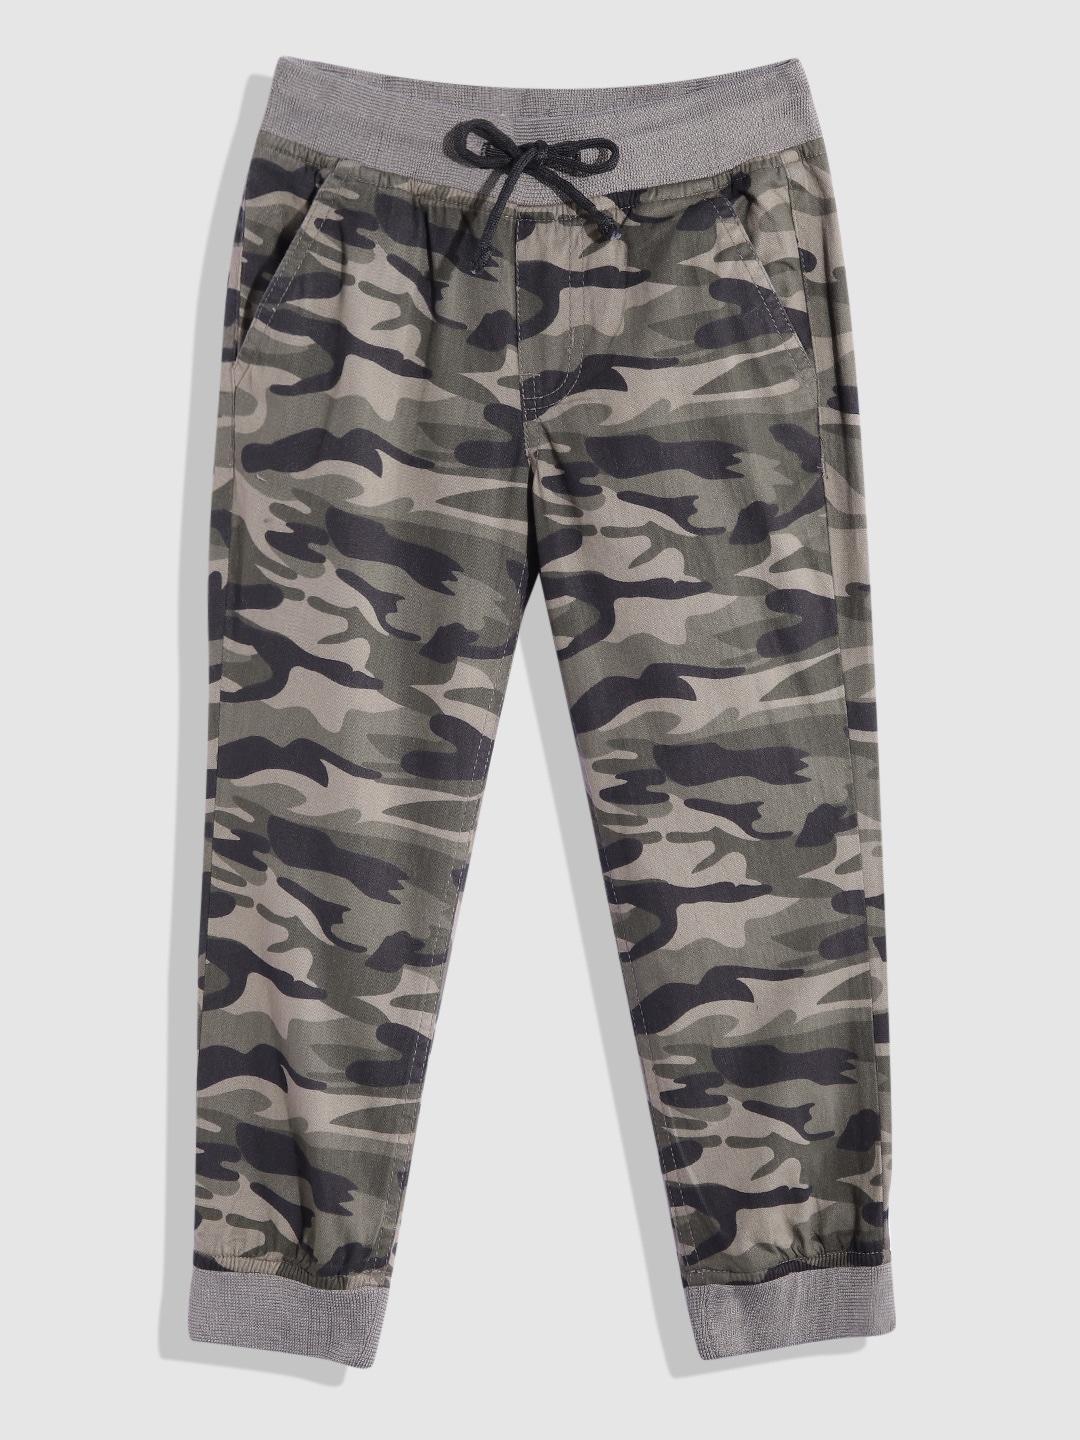 YK Boys Camouflage Printed Slim Fit Pure Cotton Joggers